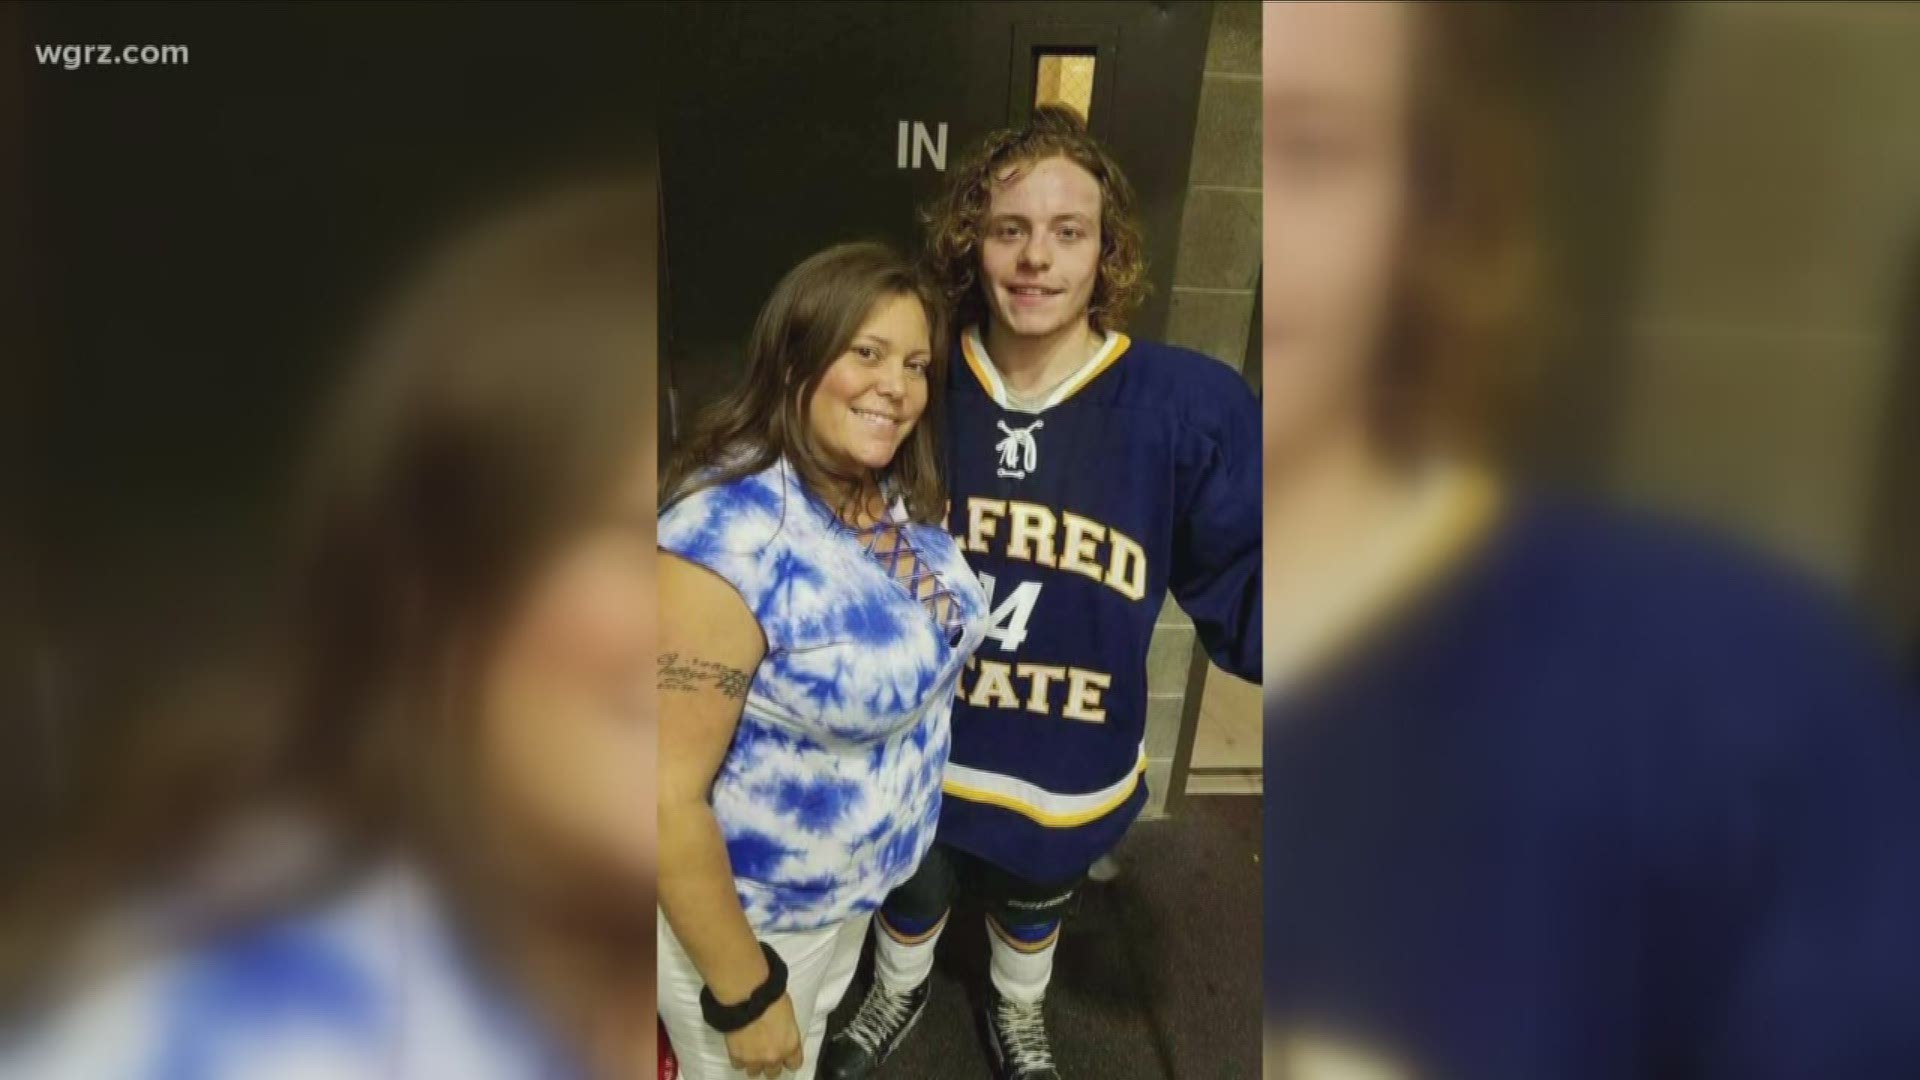 The tight-knit South Buffalo sports community is still reeling after the death of 18 year-old Cameron Velasquez over the weekend.